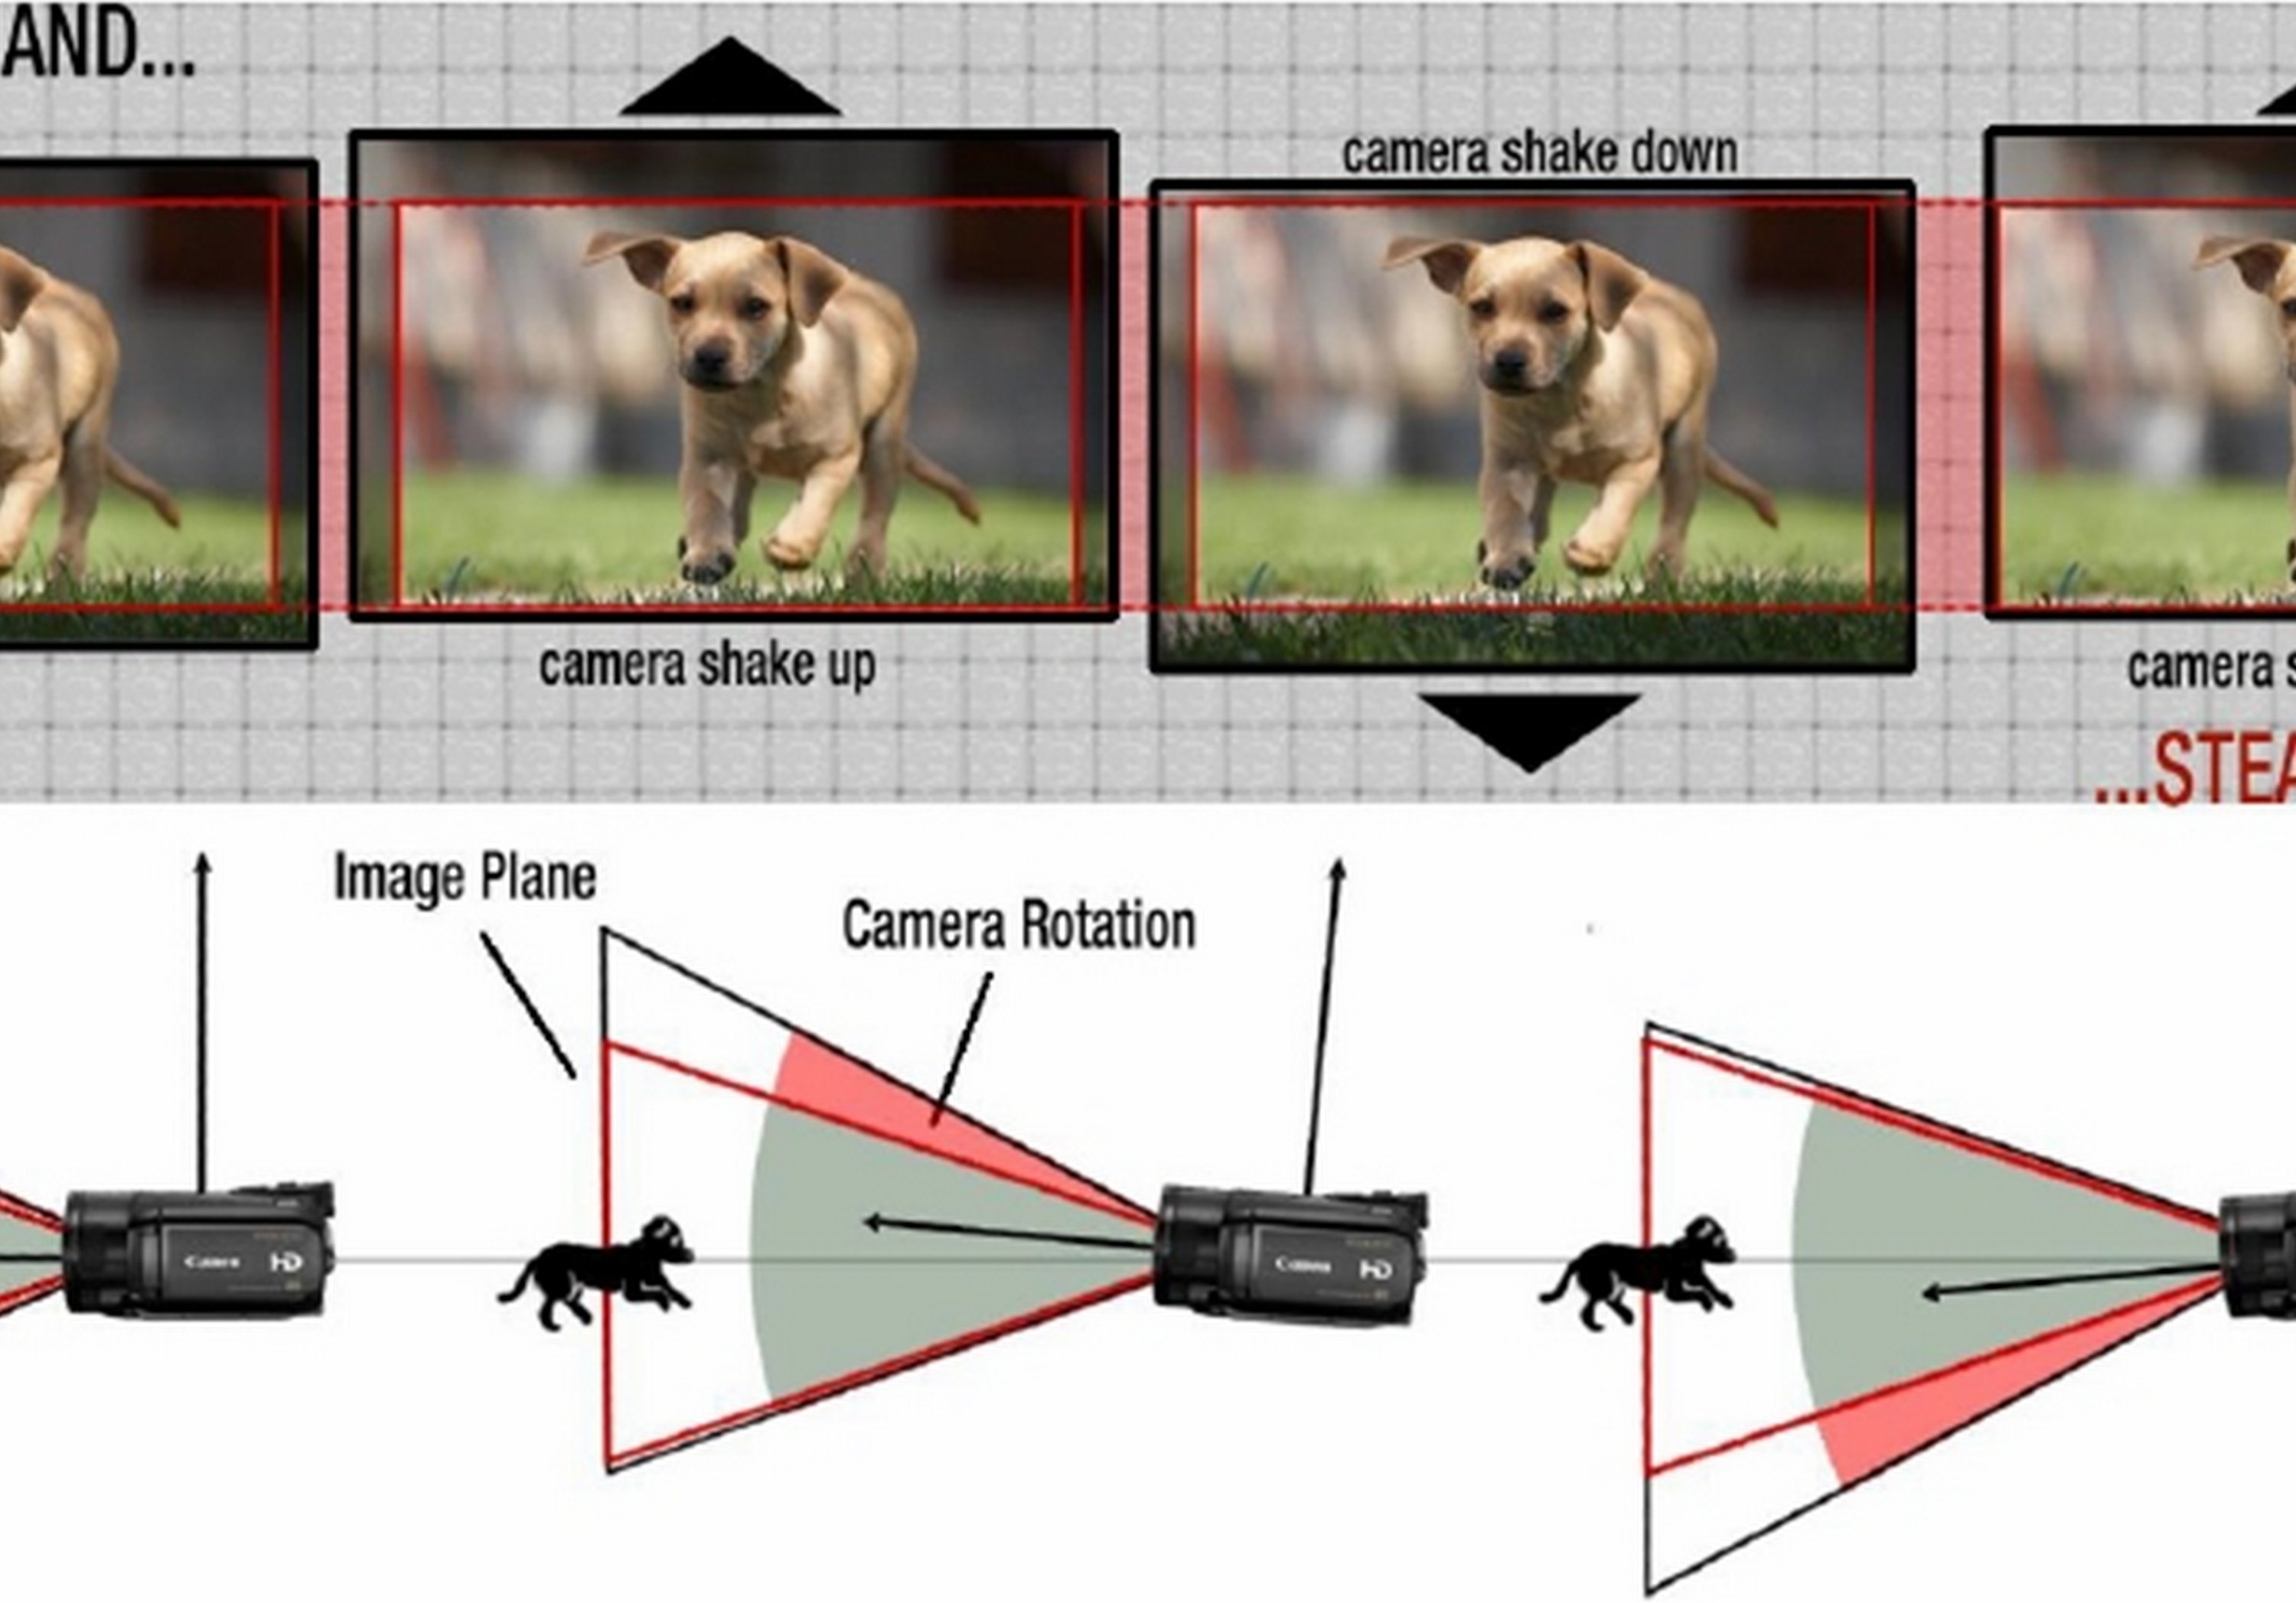 Figure 1. Digital image stabilization (DIS) uses a pixel mapping method to stabilize the image through software